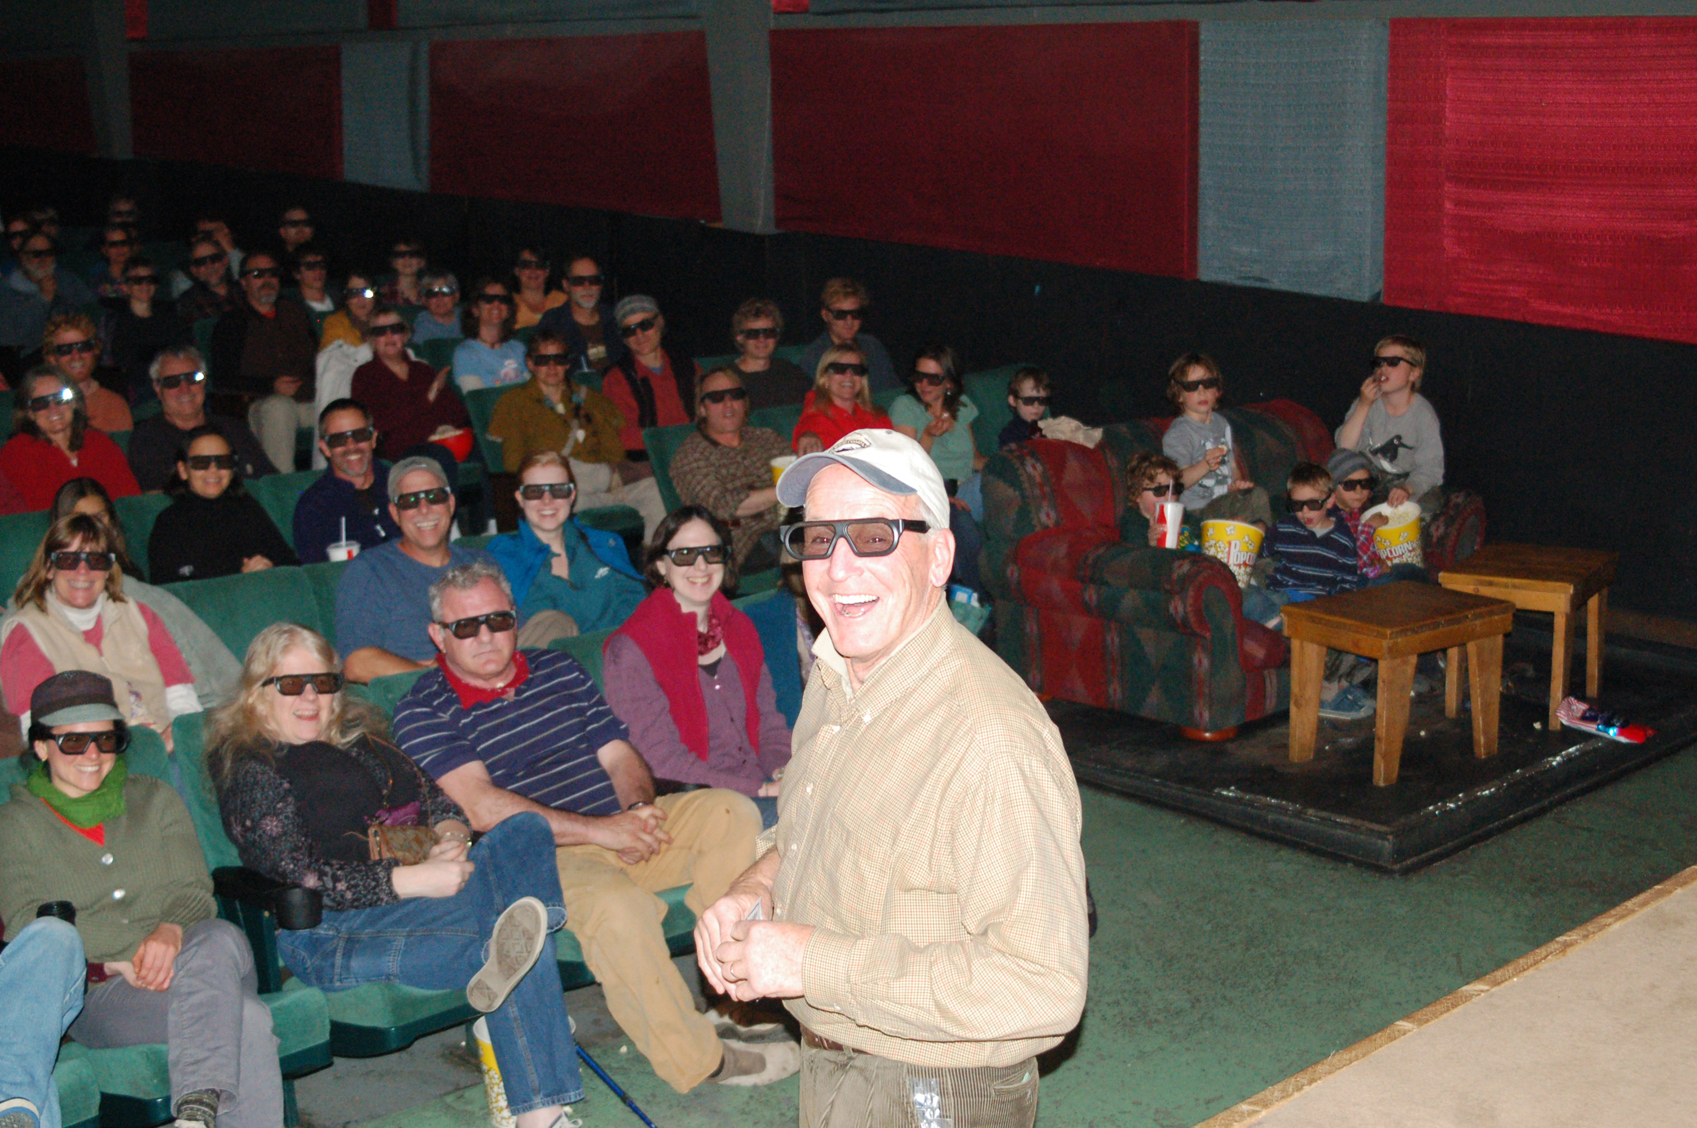 At the eighth annual Homer Documentary Film Festival in 2011, Homer Theatre owner Jamie Sutton, wearing special glasses, introduces Werner Herzog’s “Cave of Forgotten Dreams,” the first digital 3-D film shown at the theater. A digital movie projection system that allowed for the showing of 3-D films was among the improvements Jamie and Lynette Sutton made to the theater. A less high-tech improvement was adding several couches in the theater, seen at right in the photo.-Photo by Michael Armstrong, Homer News